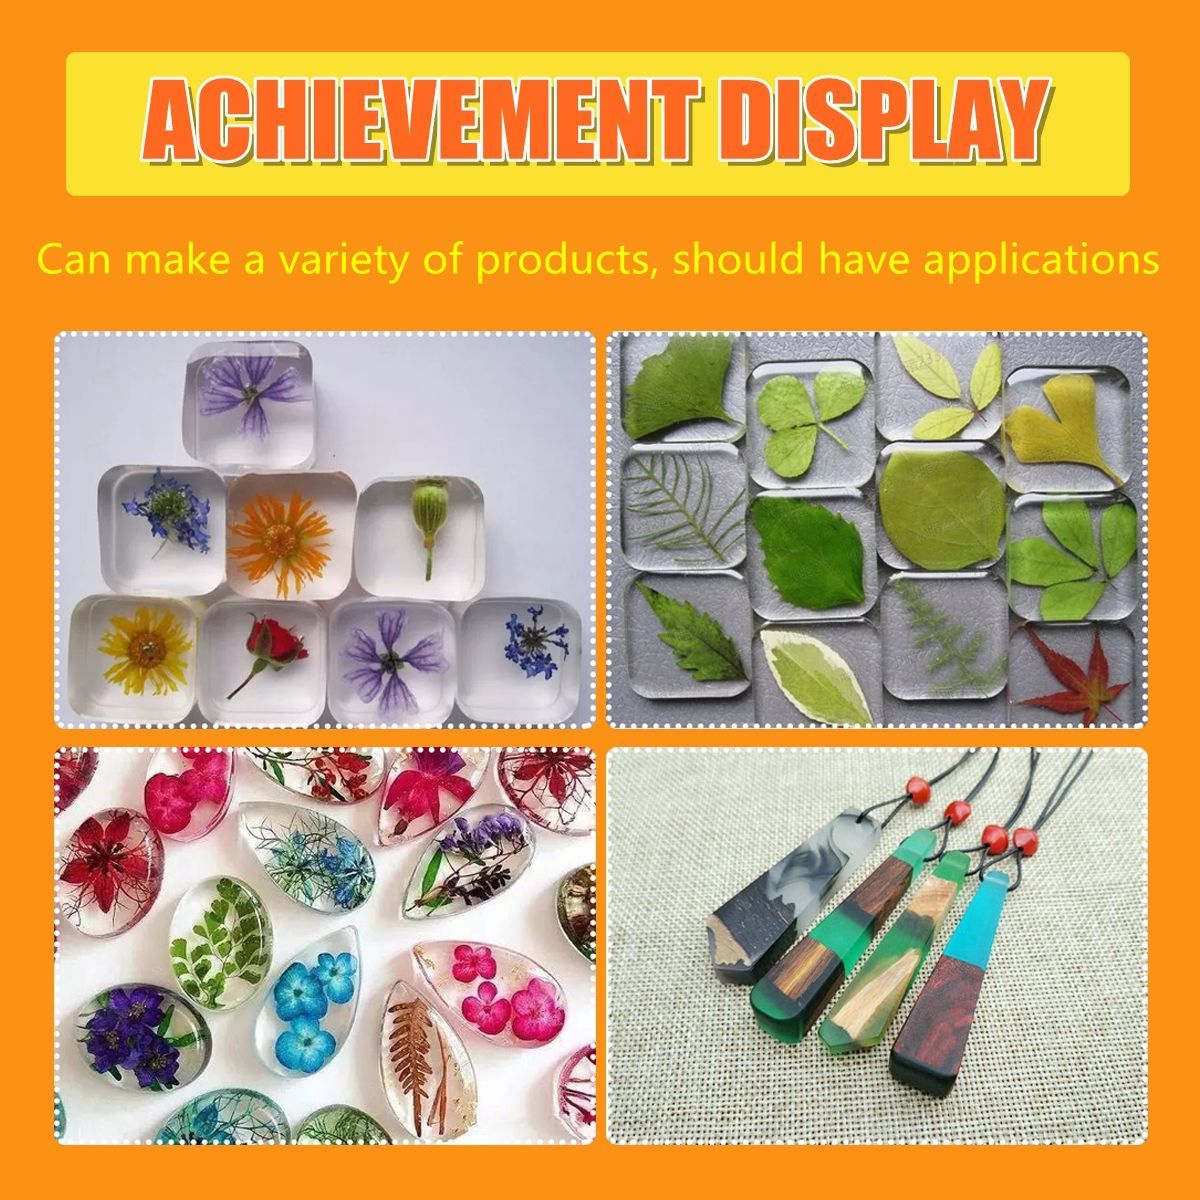 5594147159Pcs-Resin-Casting-Molds-Silicone-Pendant-Tray-Jewelry-Mould-1739577